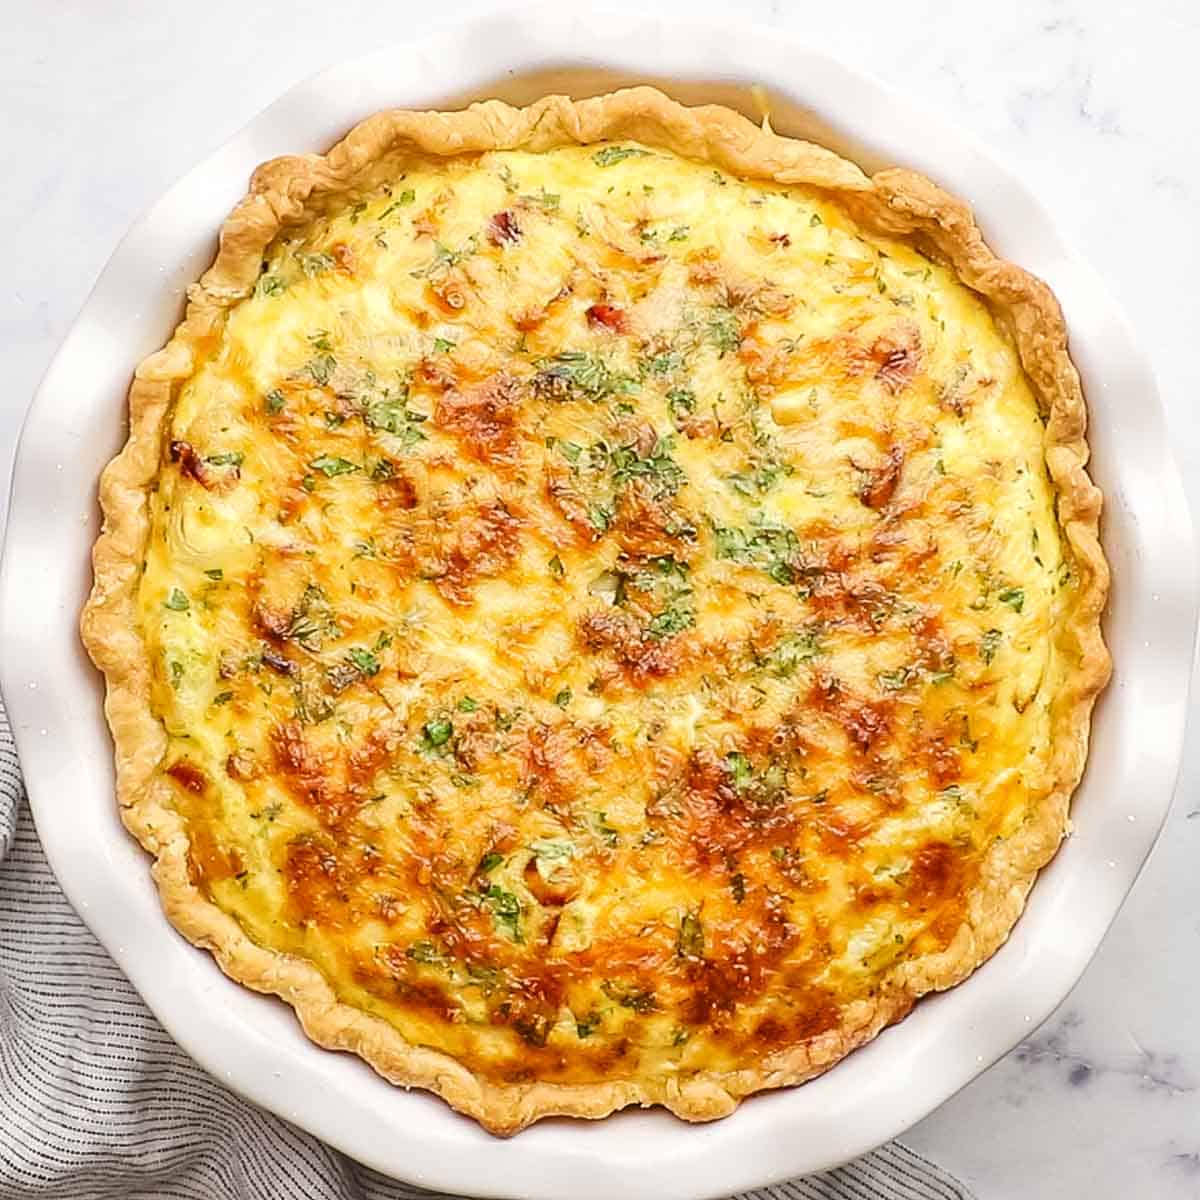 golden brown baked bacon and leek quiche in a pie dish